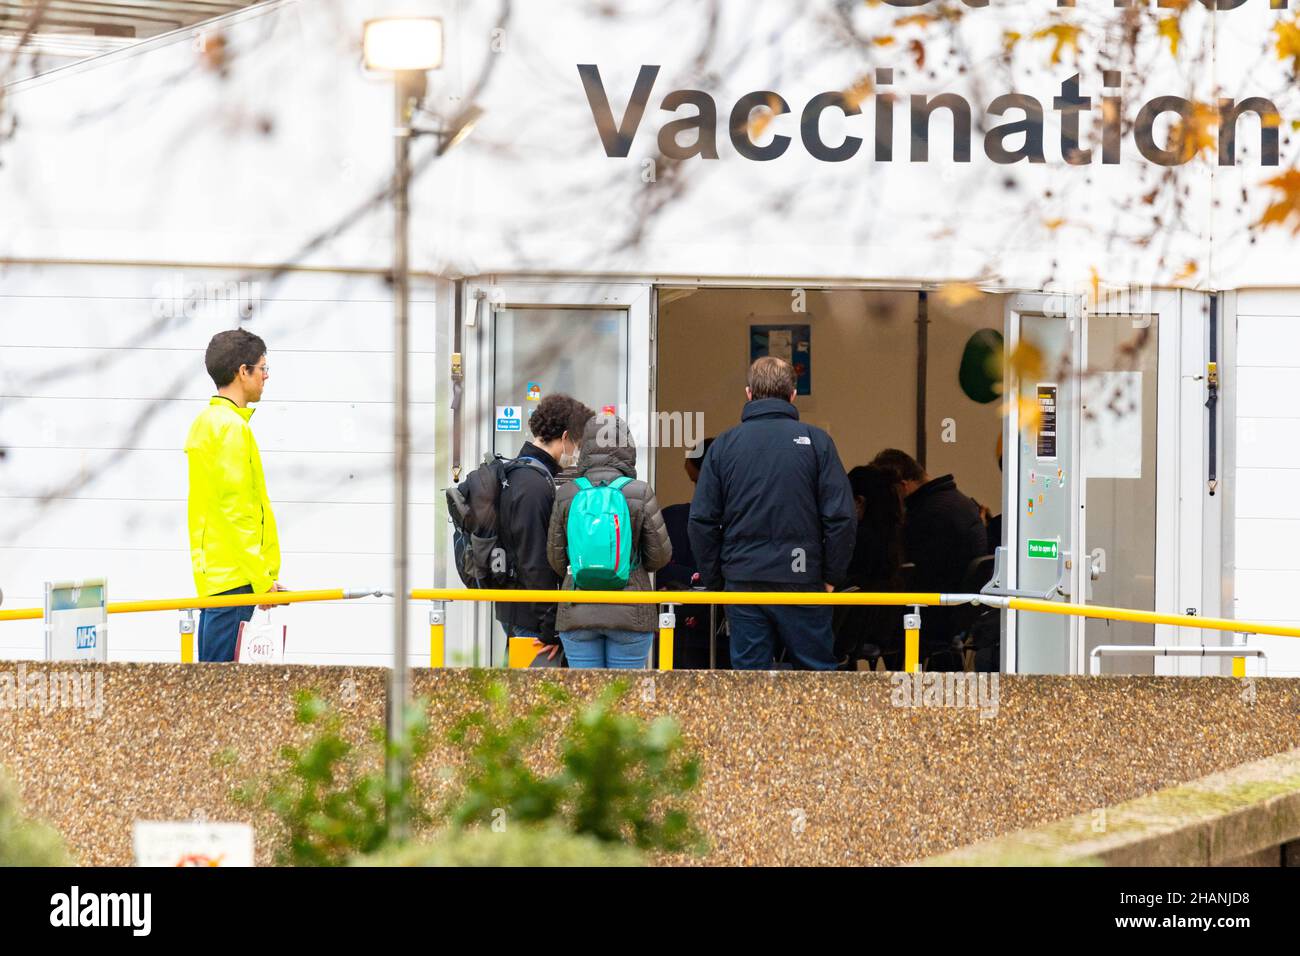 London, UK. 14th Dec, 2021. queues for Covid booster vaccine at St Thomas' hospital Westminster London Credit: Ian Davidson/Alamy Live News Stock Photo